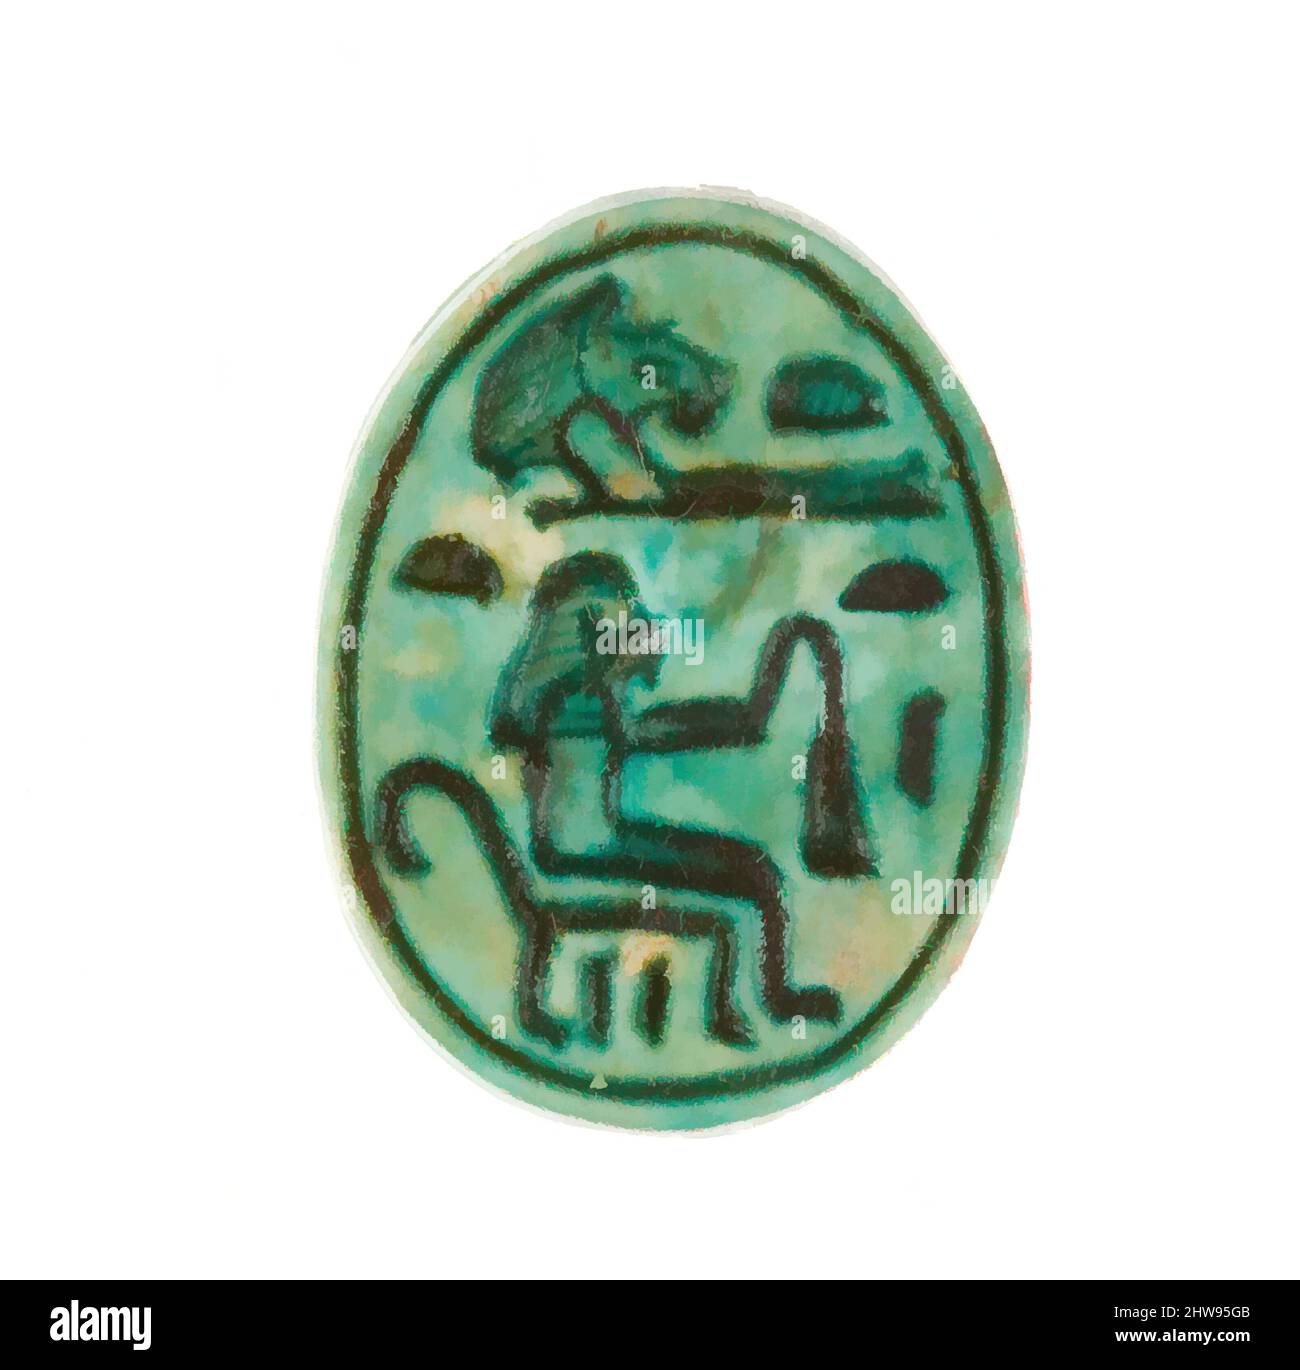 Painter's Palette Inscribed with the Name of Amenhotep III, New Kingdom